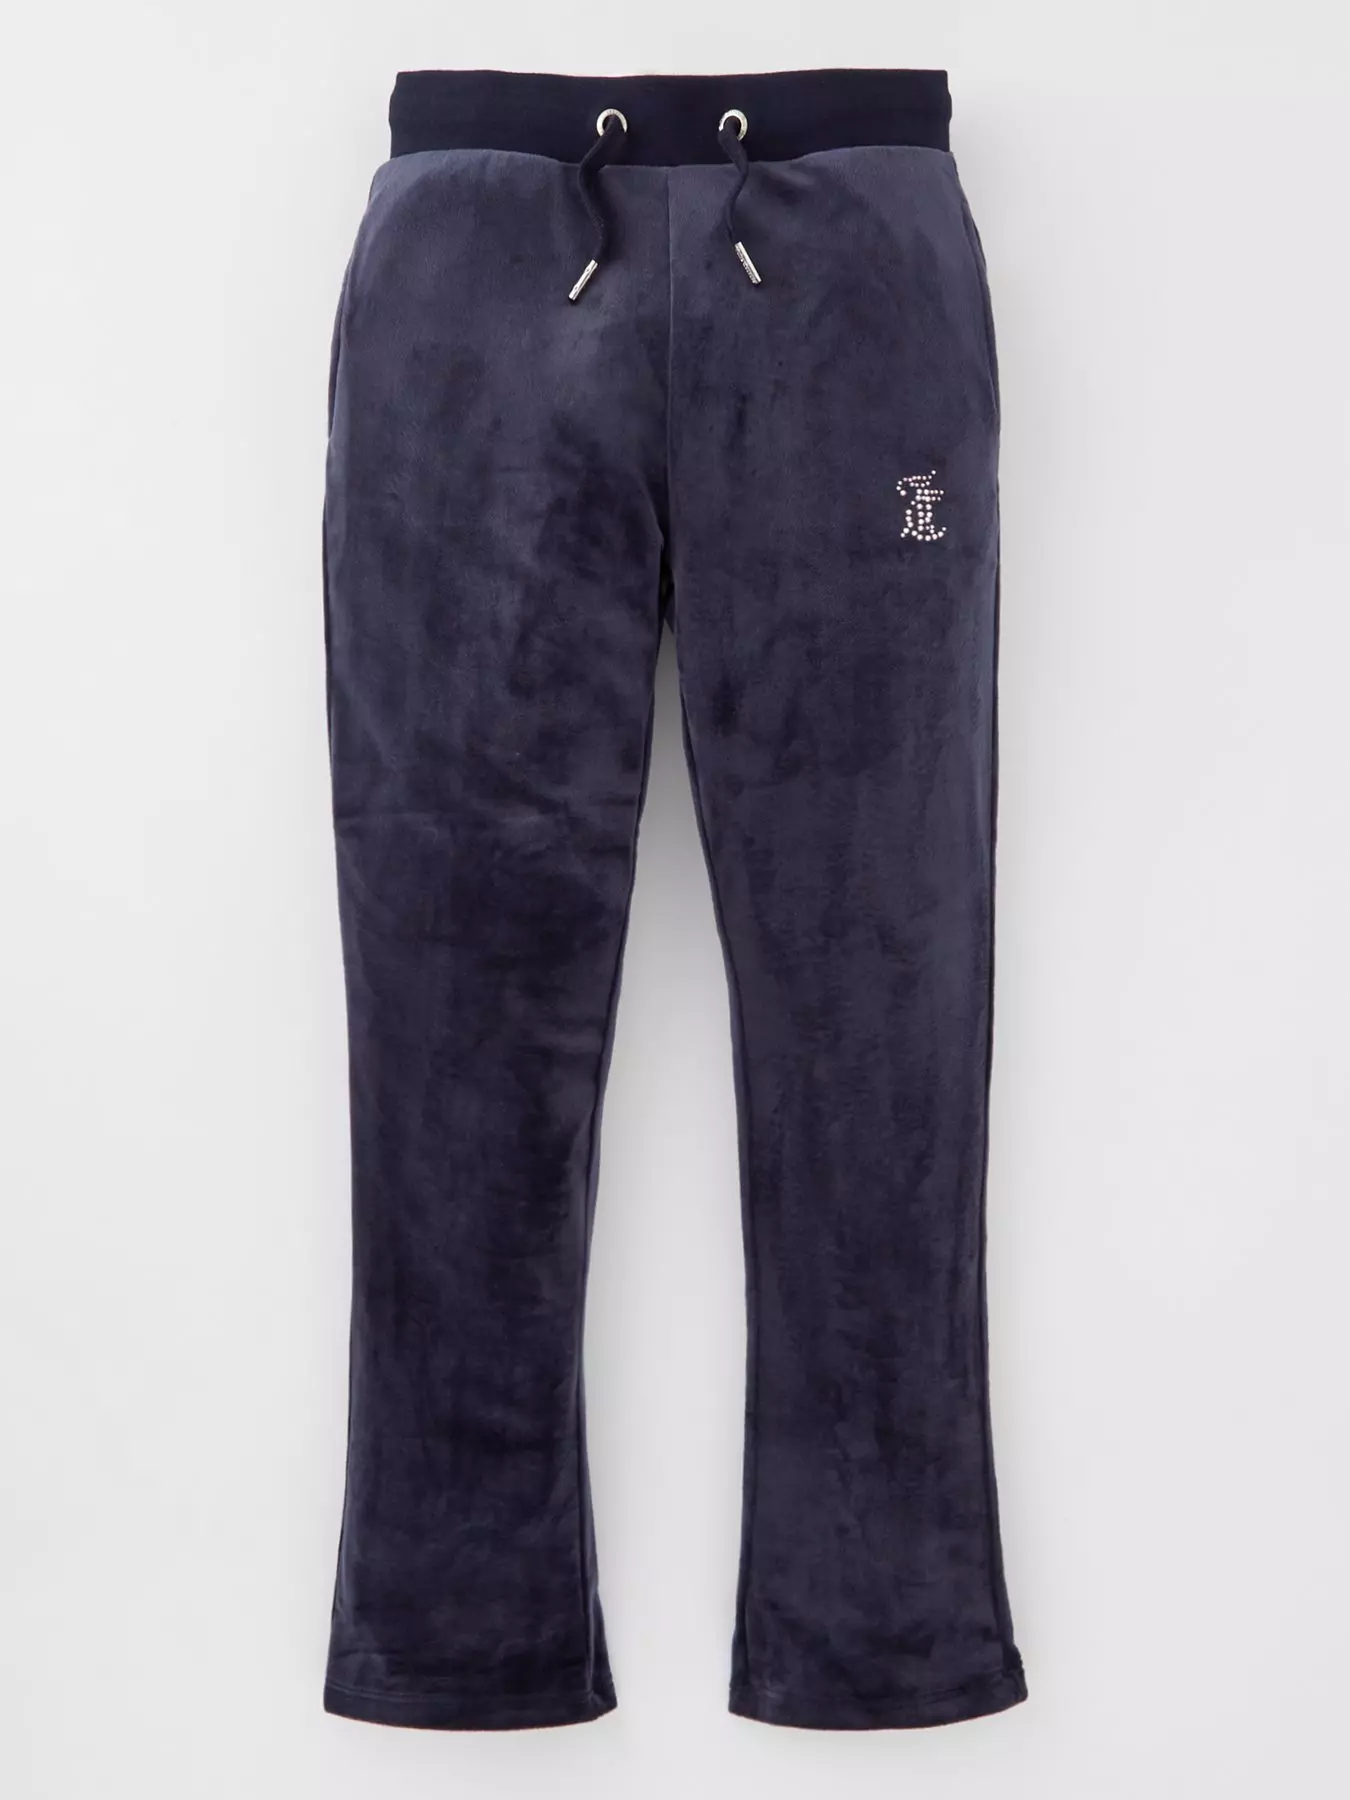 Juicy Couture Kids blue Velour Bootcut Sweatpants (7-16 Years)